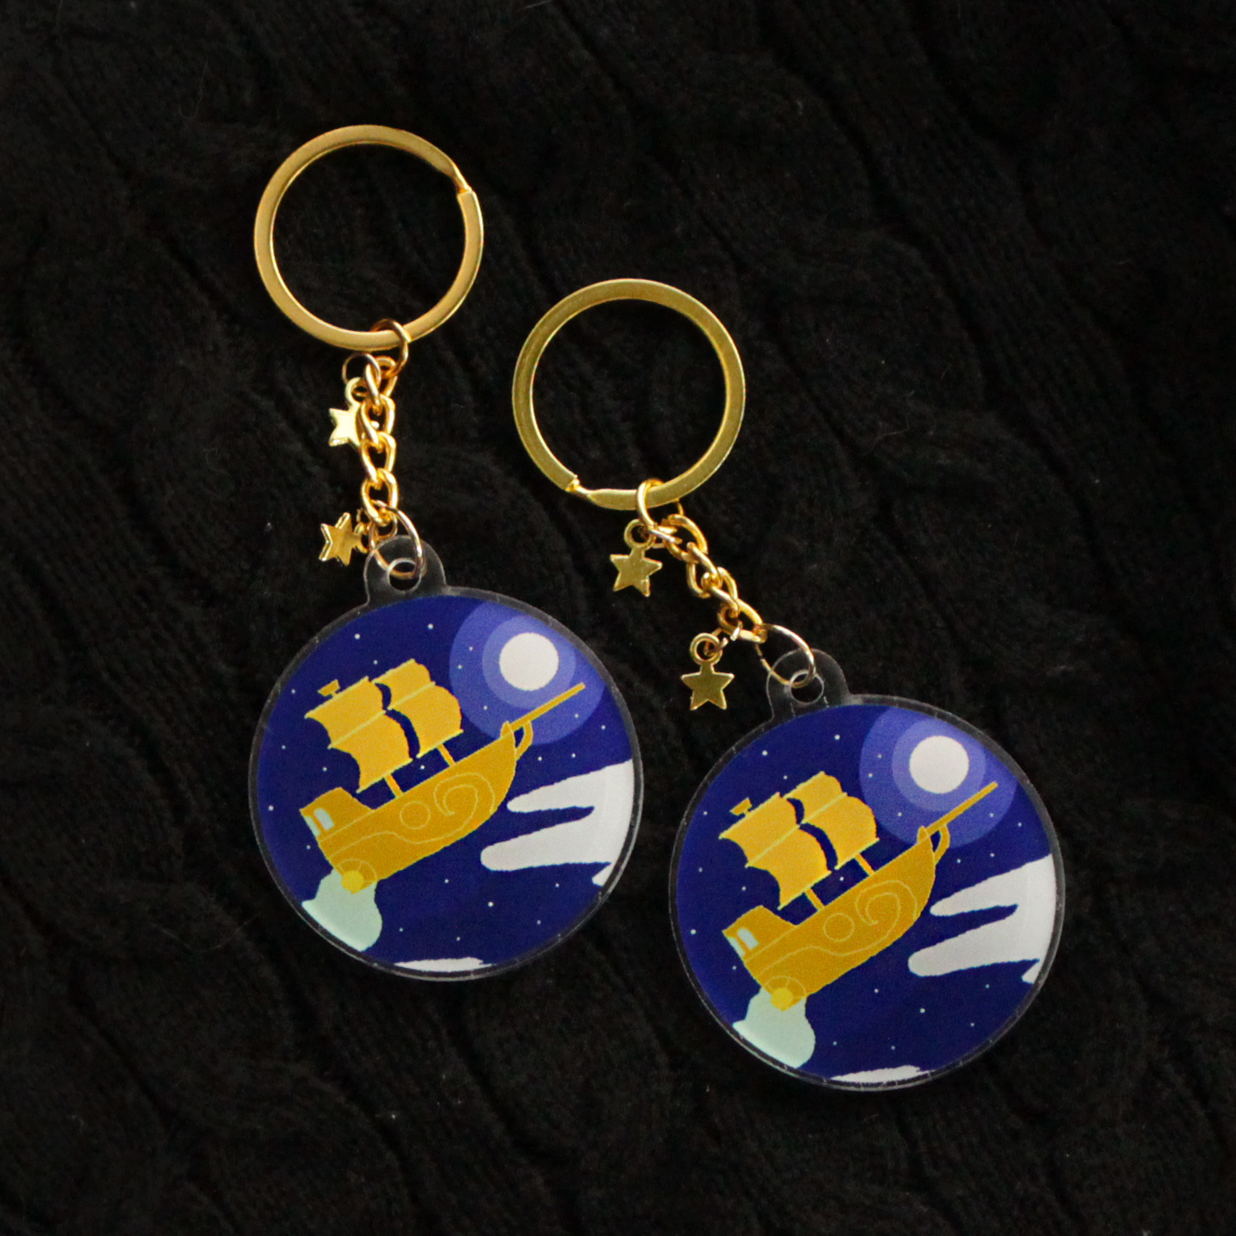 "Second Star to the Right" Keychain